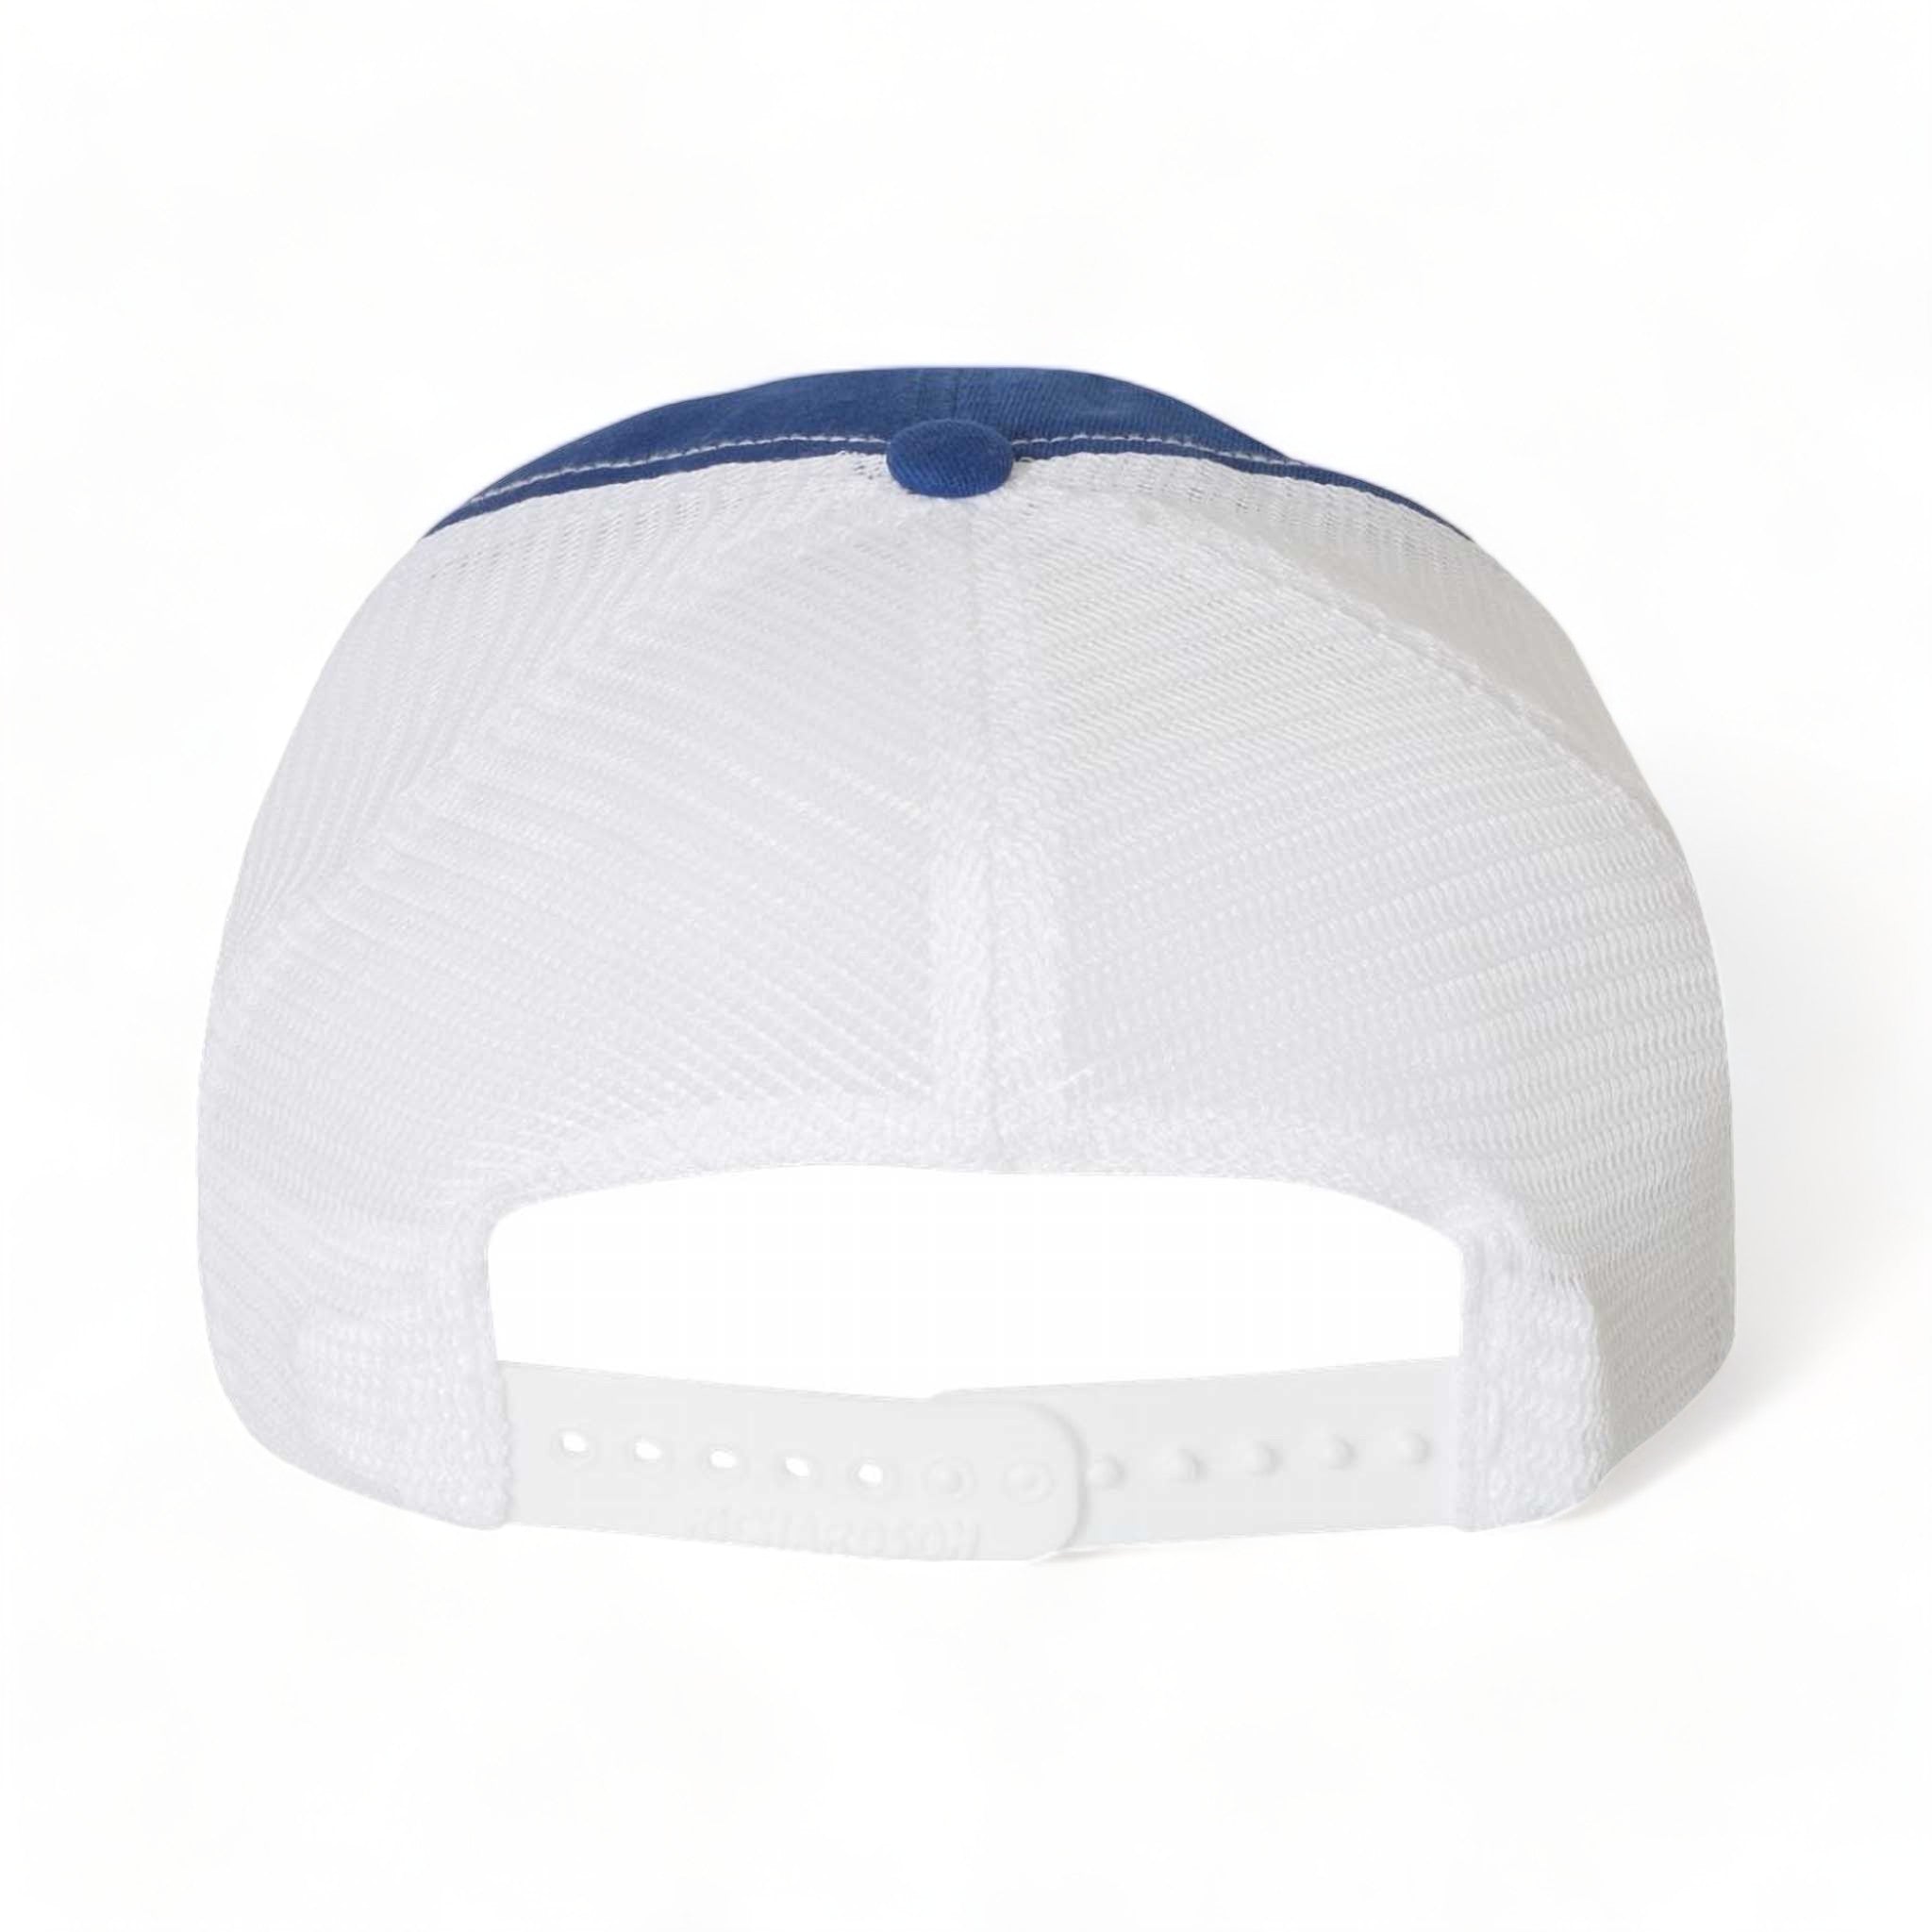 Back view of Richardson 111 custom hat in royal and white